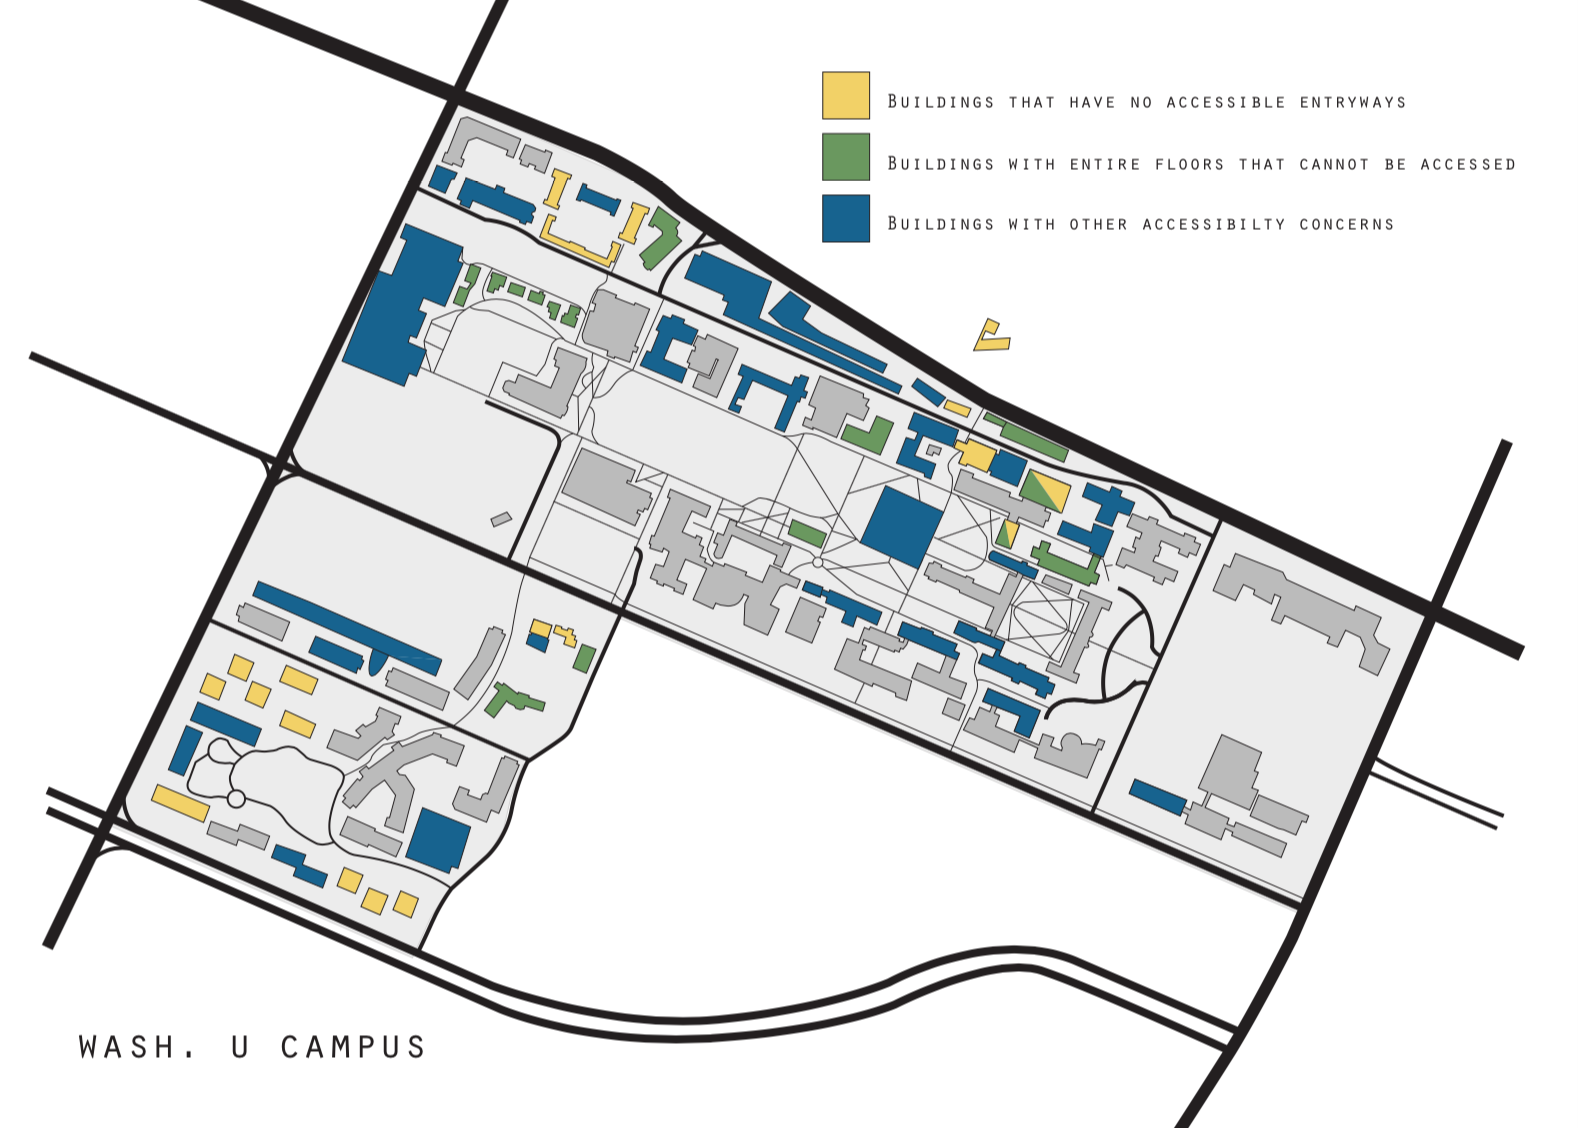 Buildings on the Danforth Campus with accessibility concerns for students with physical disabilities are highlighted according to the University’s published campus accessibility data.